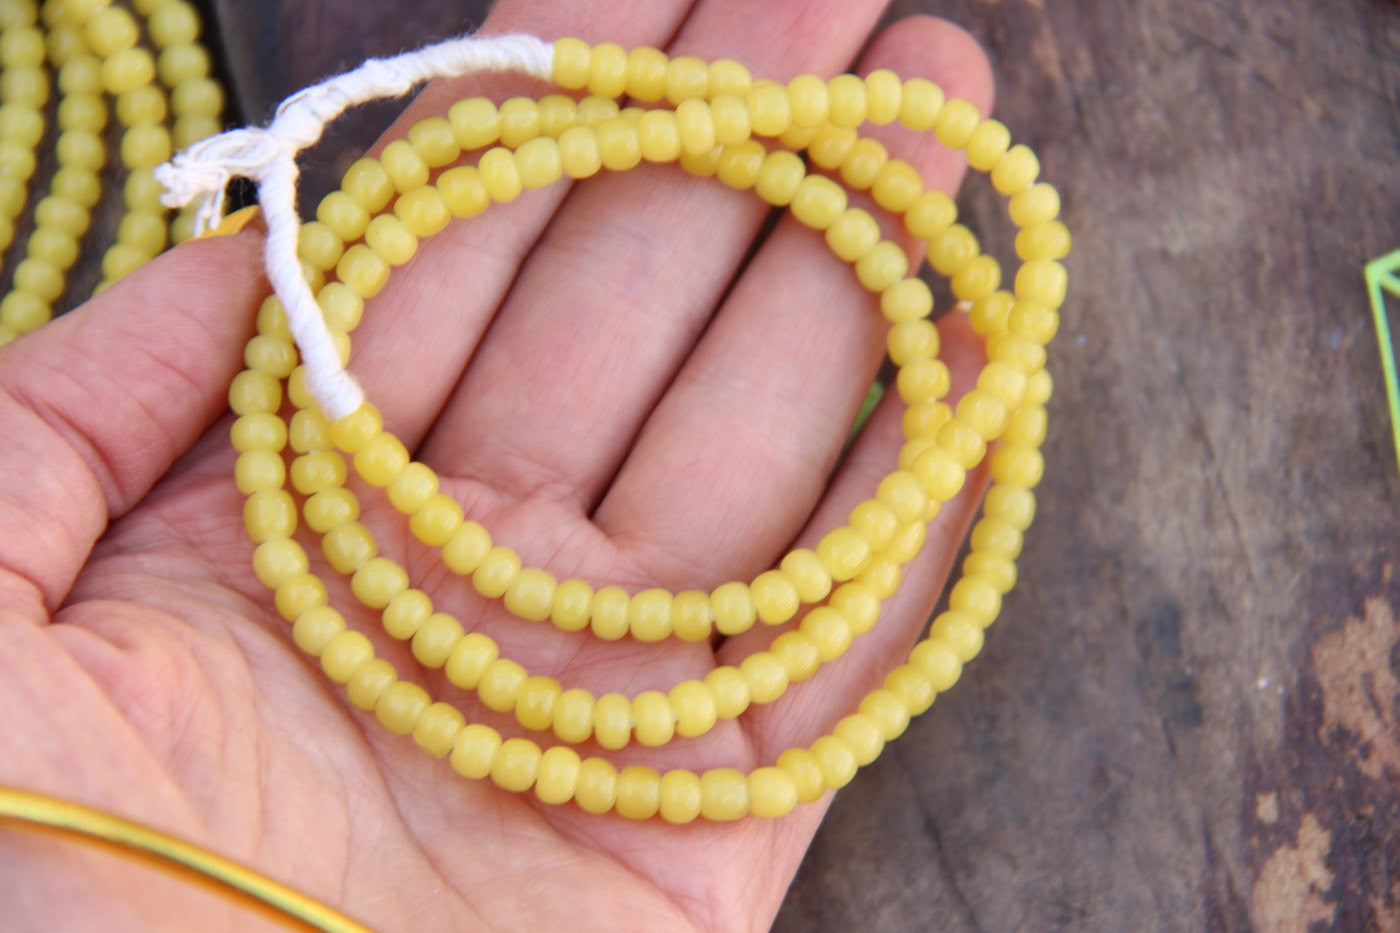 Buttercup: Vintage French Yellow Glass Rondelle Beads, Approx 4mm - ShopWomanShopsWorld.com. Bone Beads, Tassels, Pom Poms, African Beads.